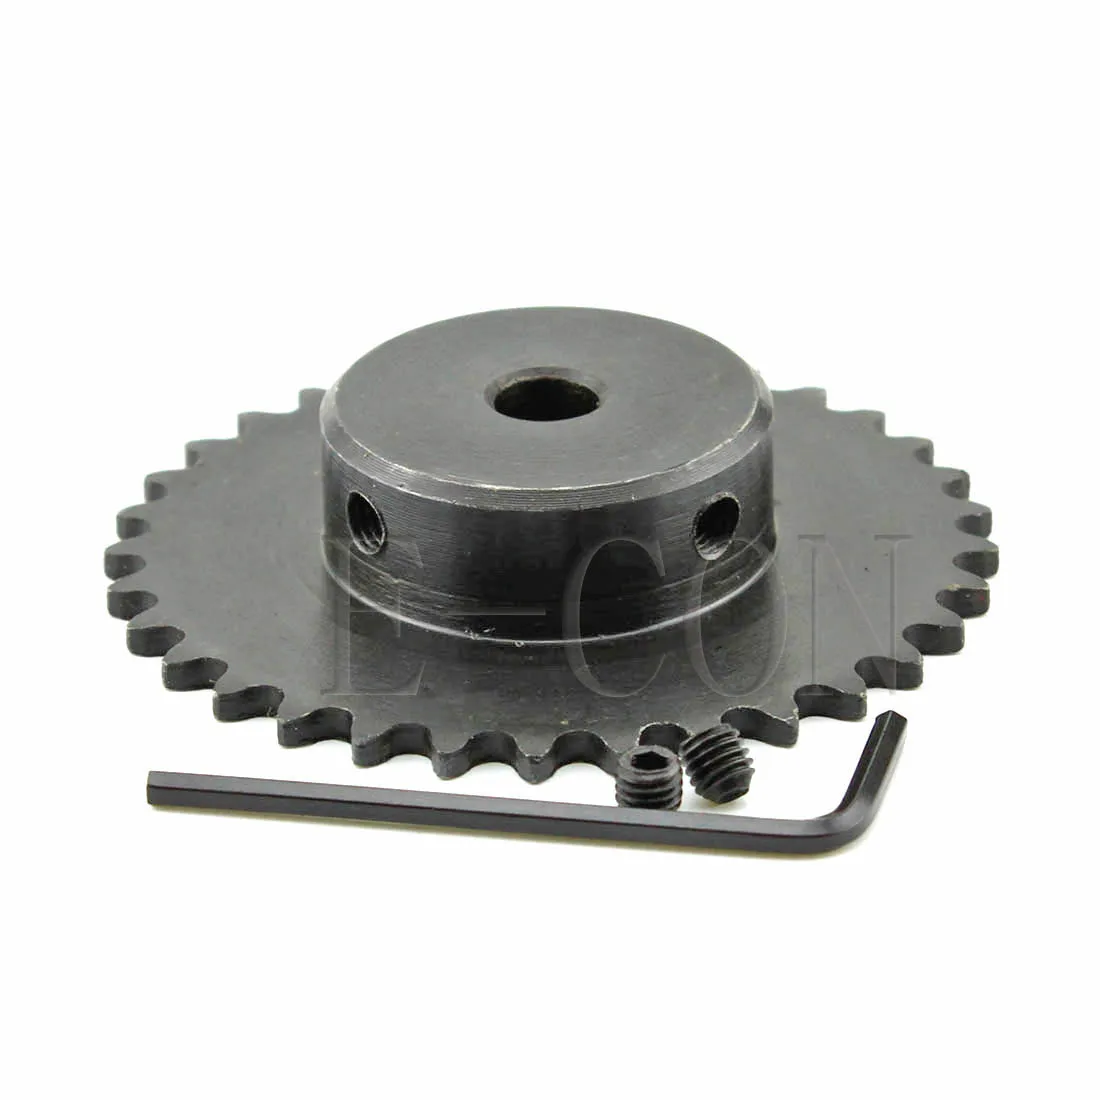 

1 PCS 04C 30 Teeth Sprocket Bore 16mm Metal Pilot Motor Gear Roller Chain Drive 25H 30T 2" for Motorcycle Timing Chain DIY